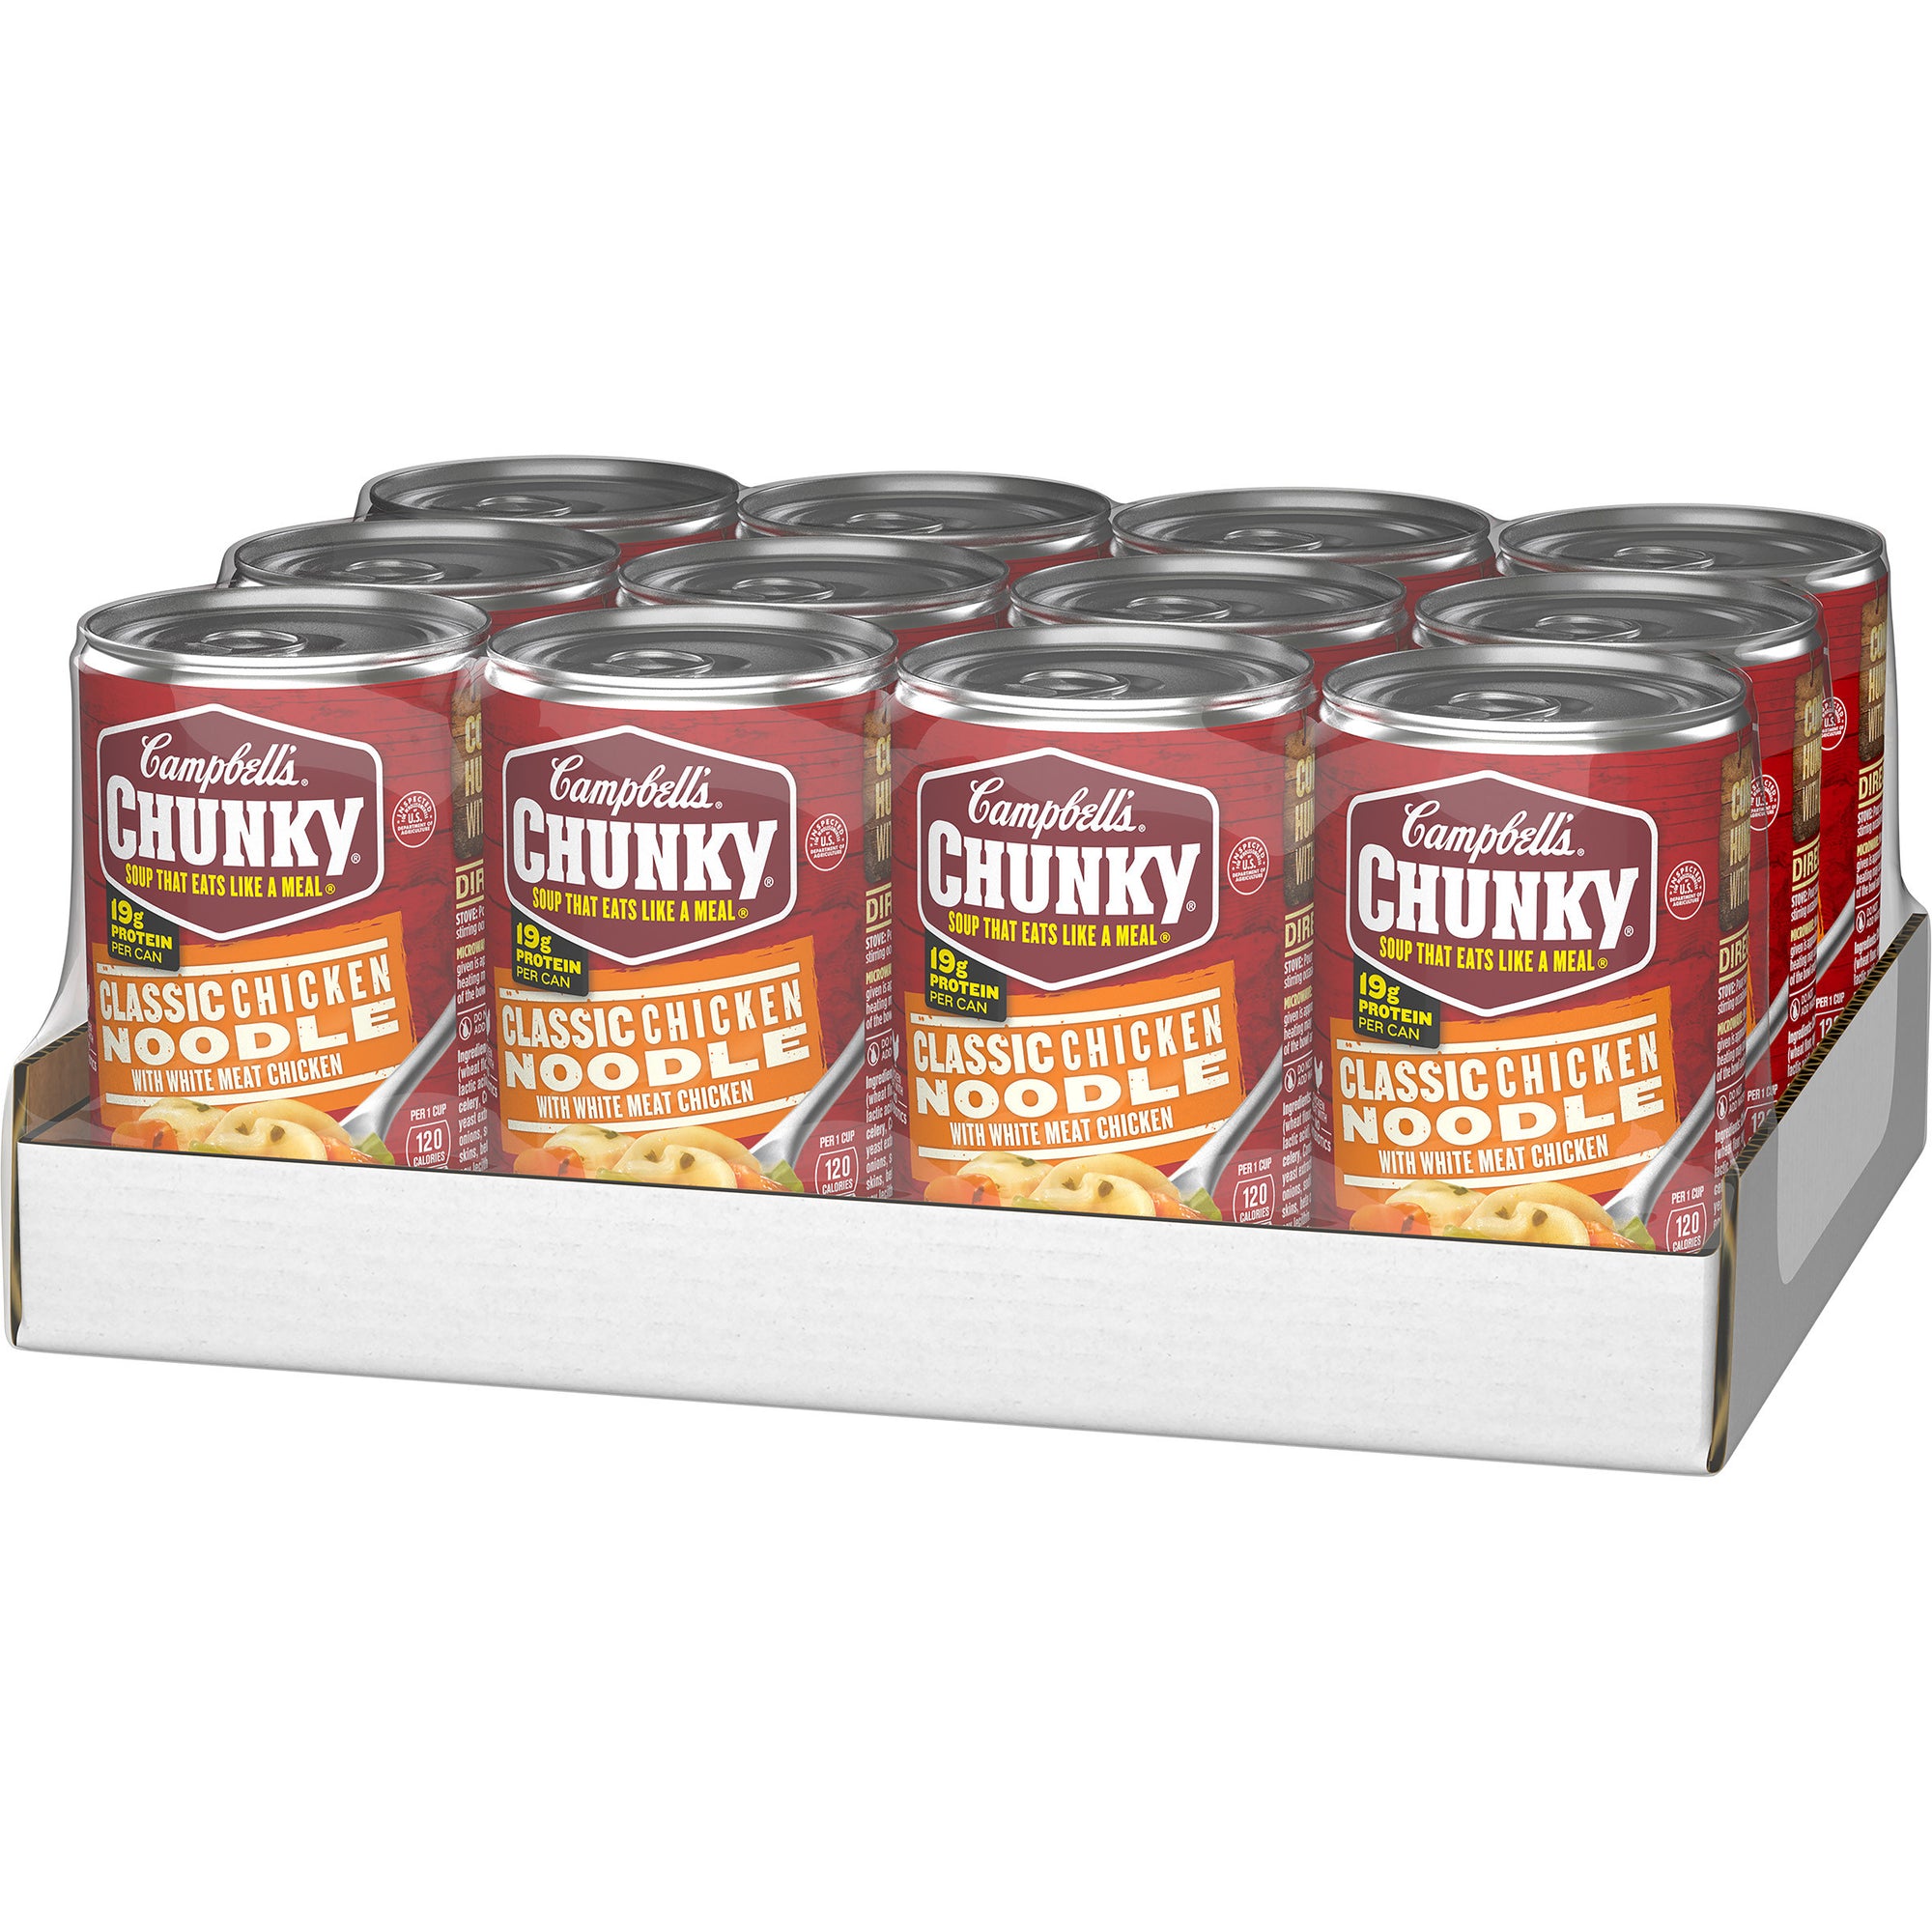 CAMPBELL'S CHUNKY CLASSIC CHICKEN NOODLE EASYOPEN SOUP, 12 - 18.6 OZ